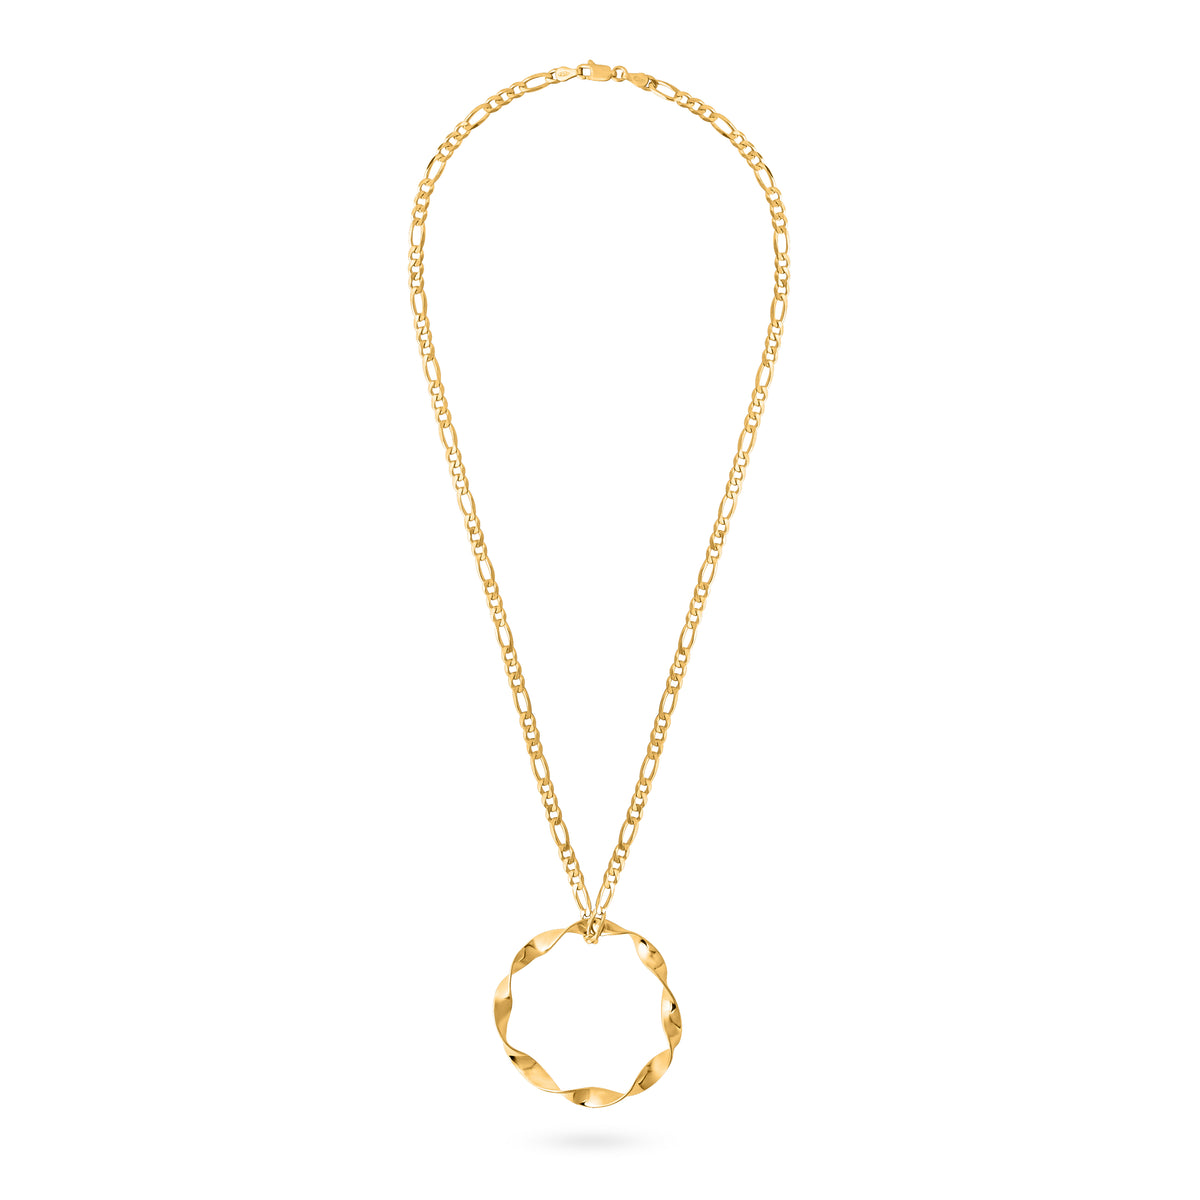 VIKA jewels self love collection wave welle pendant necklace kette Anhänger recycled sterling silver 18 carat gold plated vergoldet handmade bali sustainable ethical nachhaltig schmuck